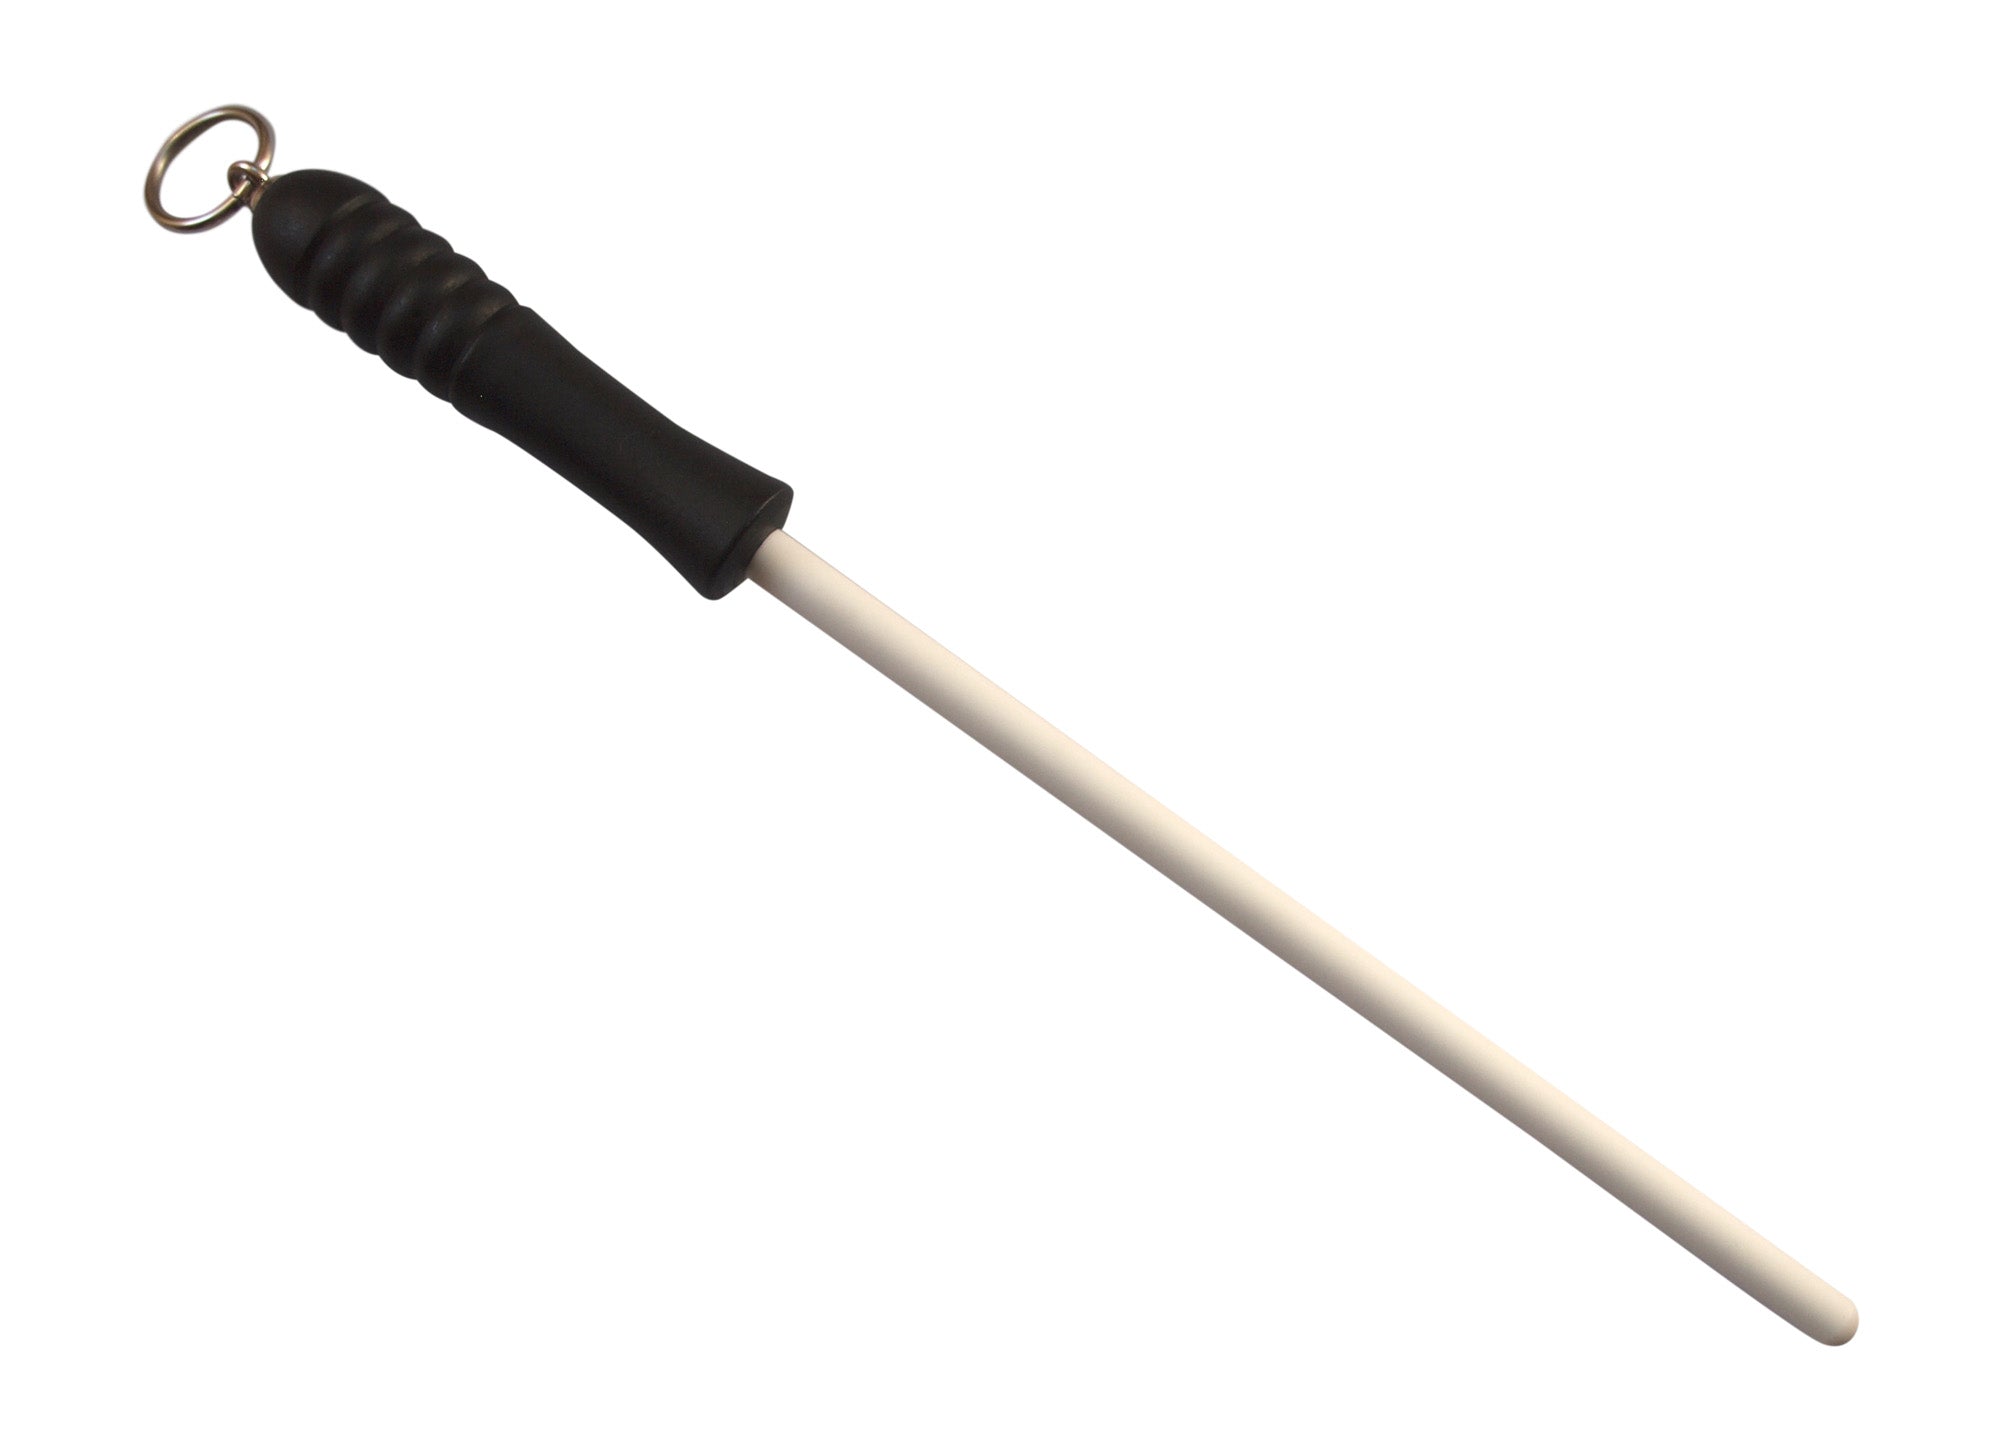 10 Fine Honing Rod with Black Handle